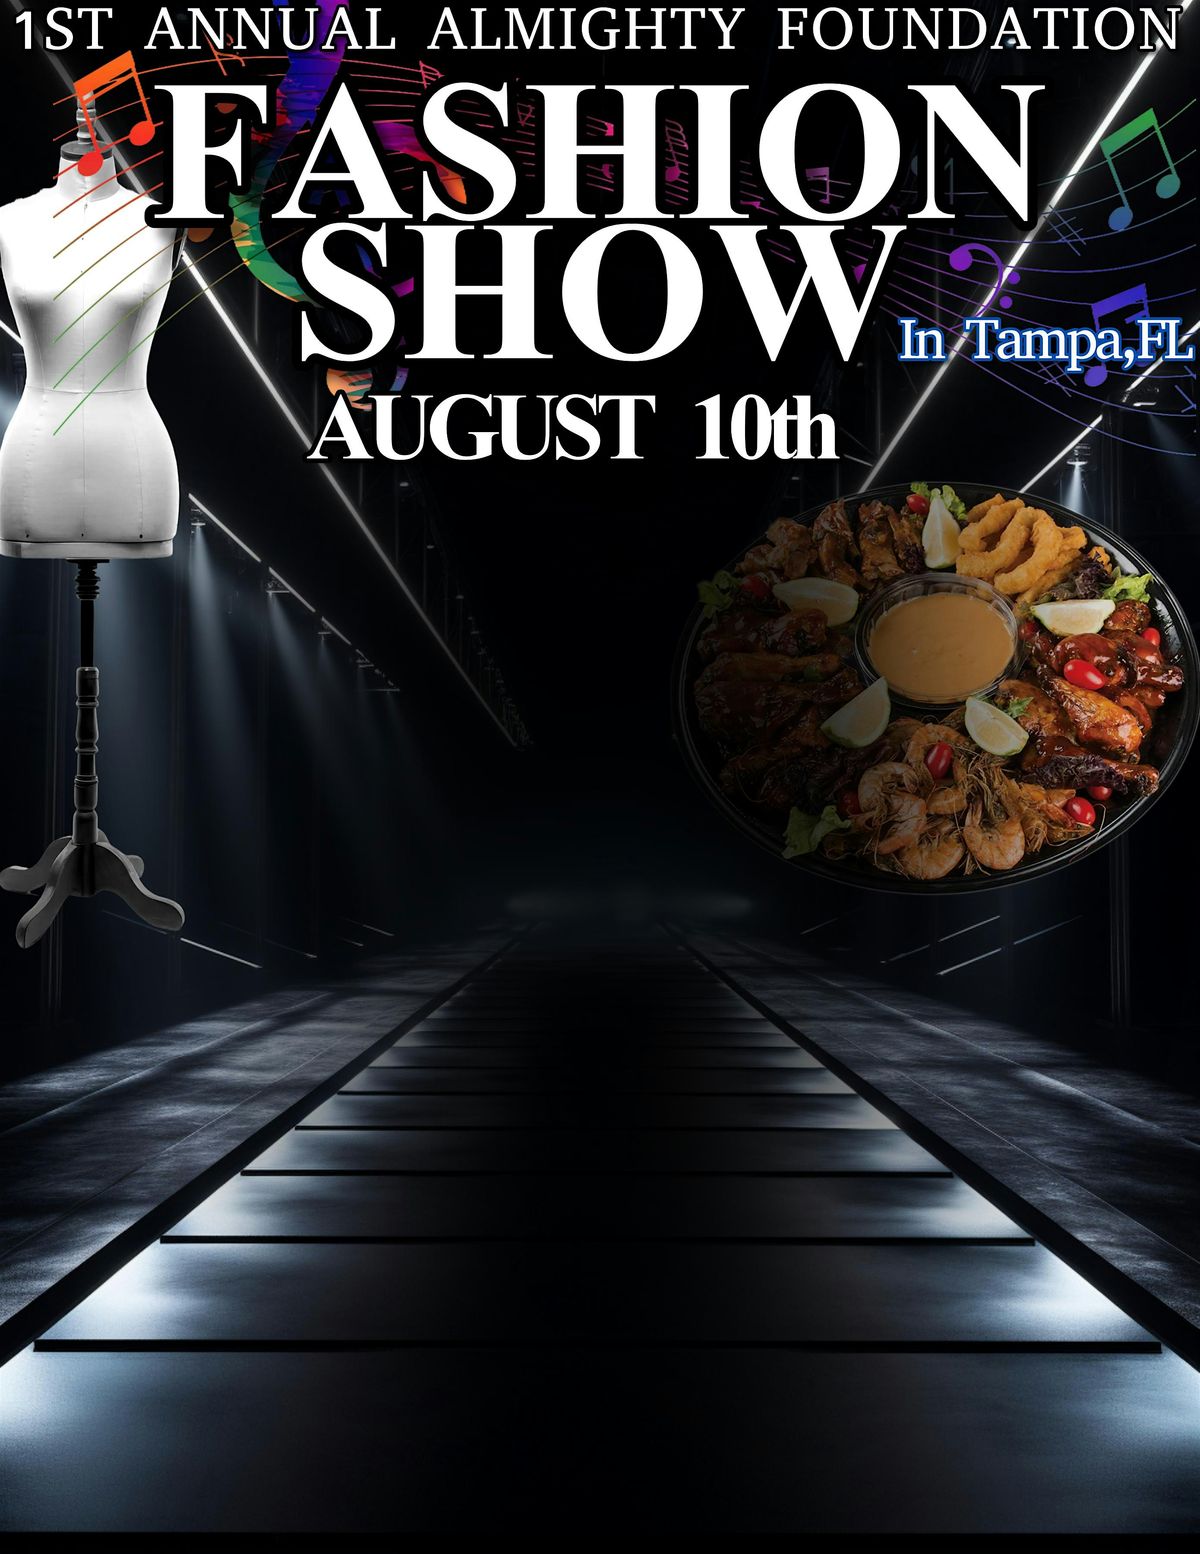 1ST ANNUAL ALMIGHTY FOUNDATION FASHION SHOW